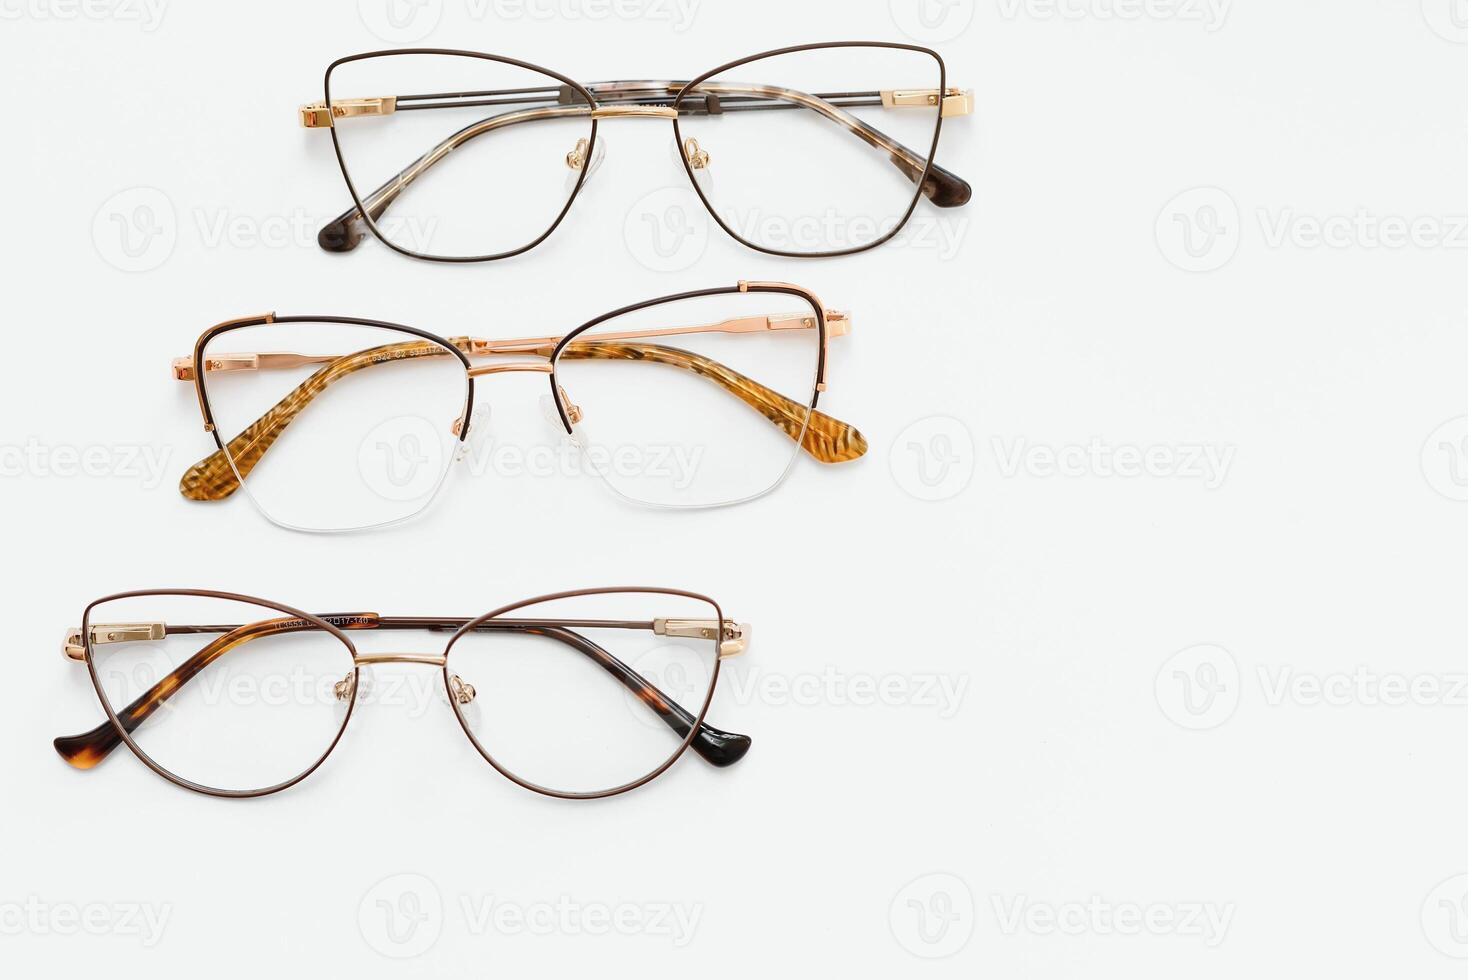 Stylish eyeglasses over background. Optical store, glasses selection, eye test, vision examination at optician, fashion accessories concept. Top view, flat lay photo